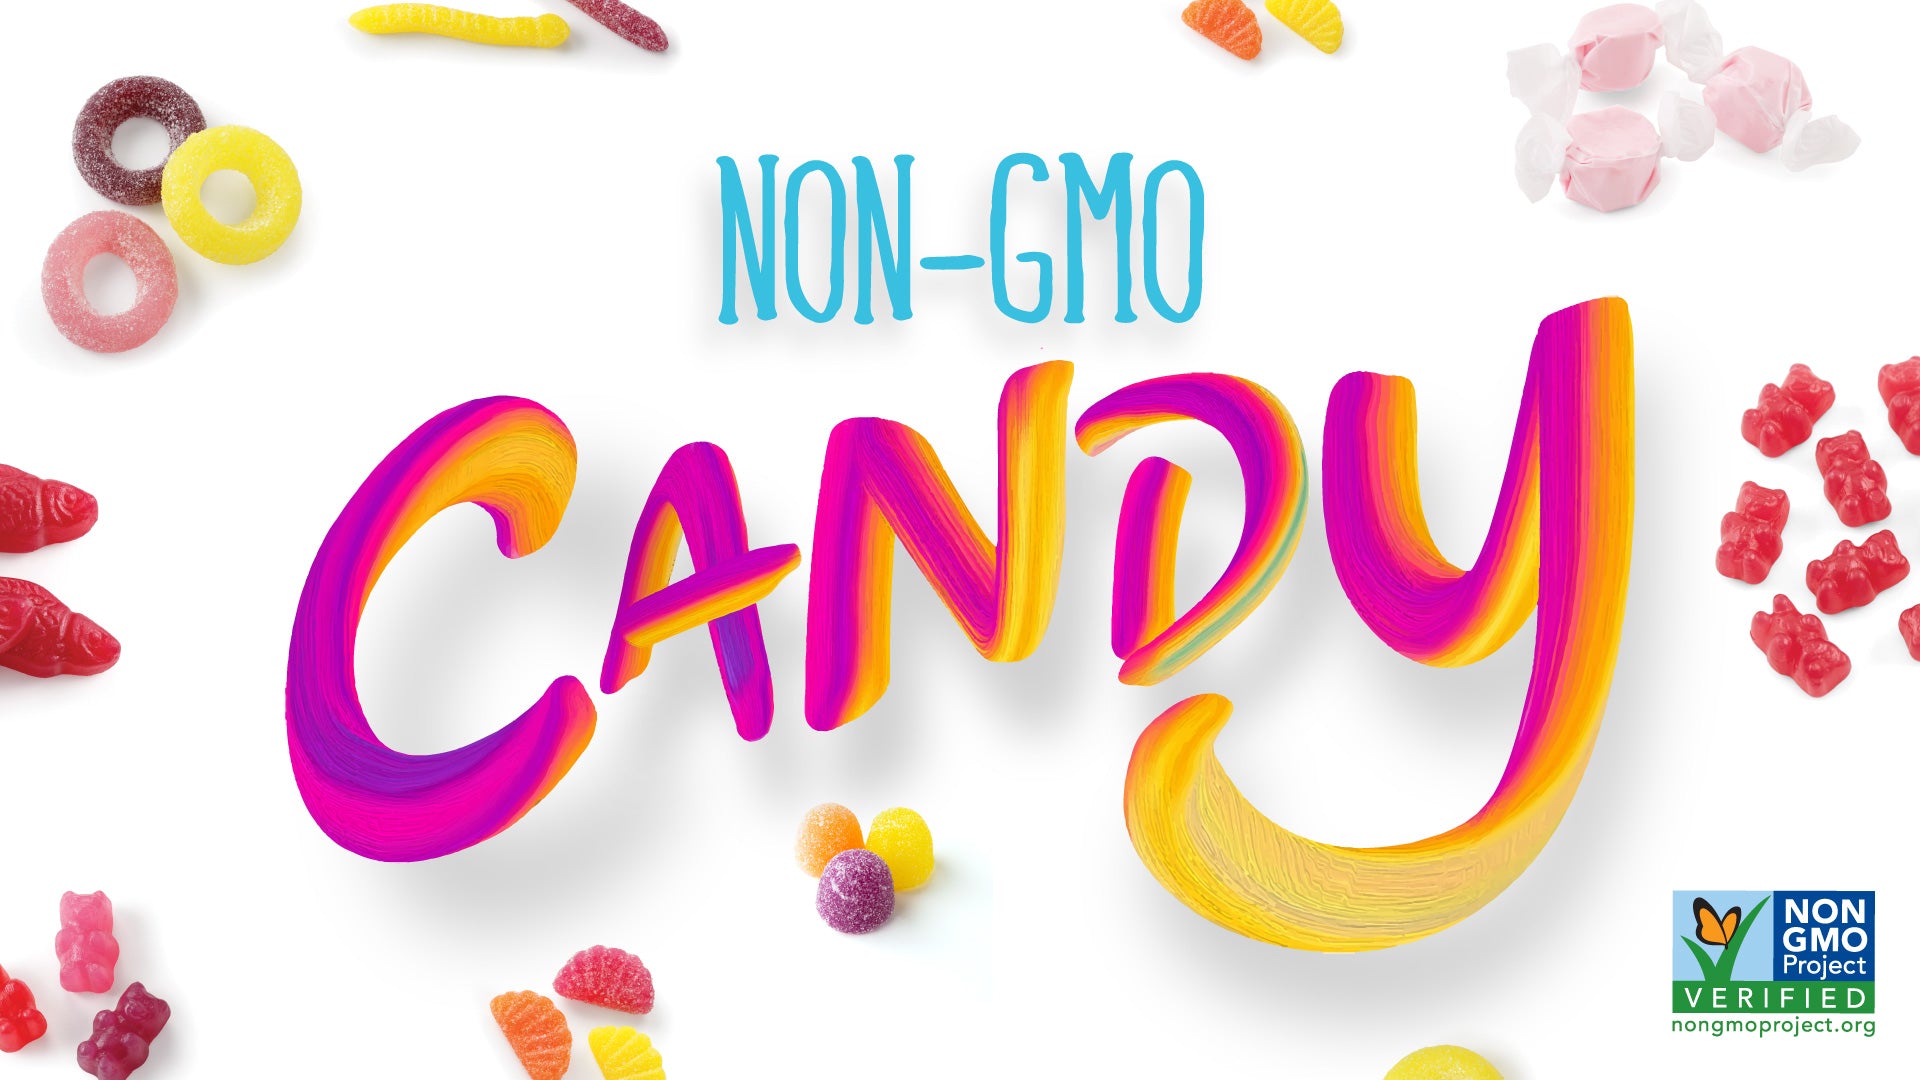 Non-GMO Project Verified Candy by Sweet Candy Company